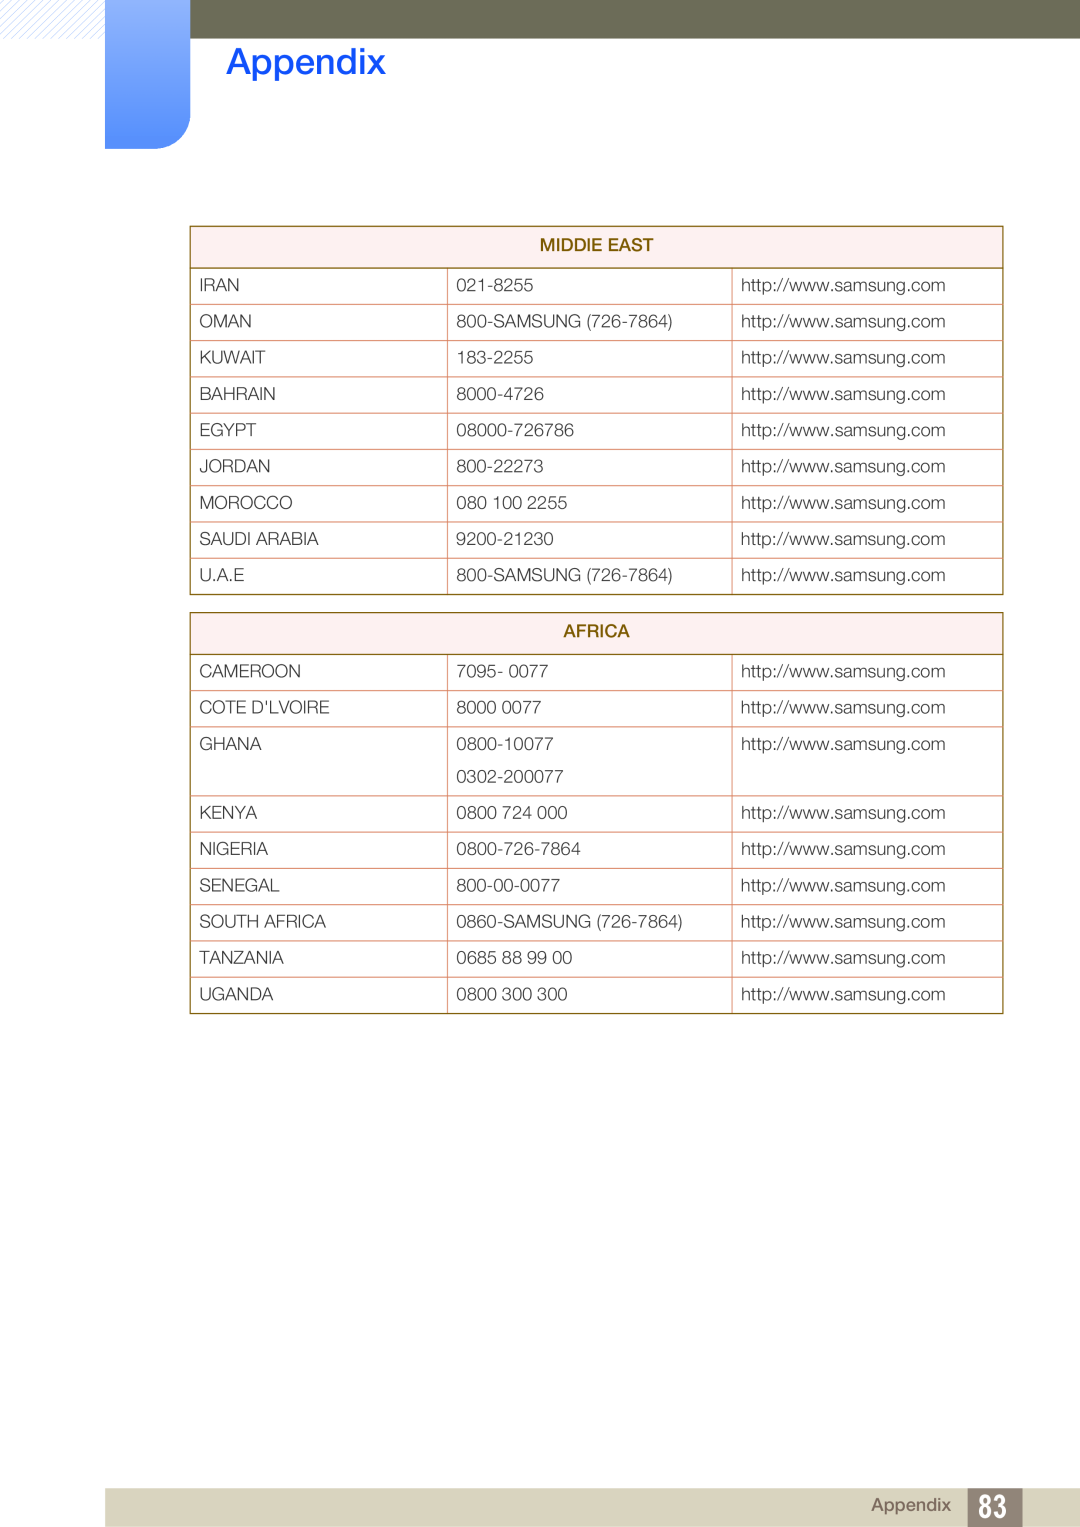 Samsung S23A750D, S27A750D user manual Appendix, MIDDlE EAST, Africa 